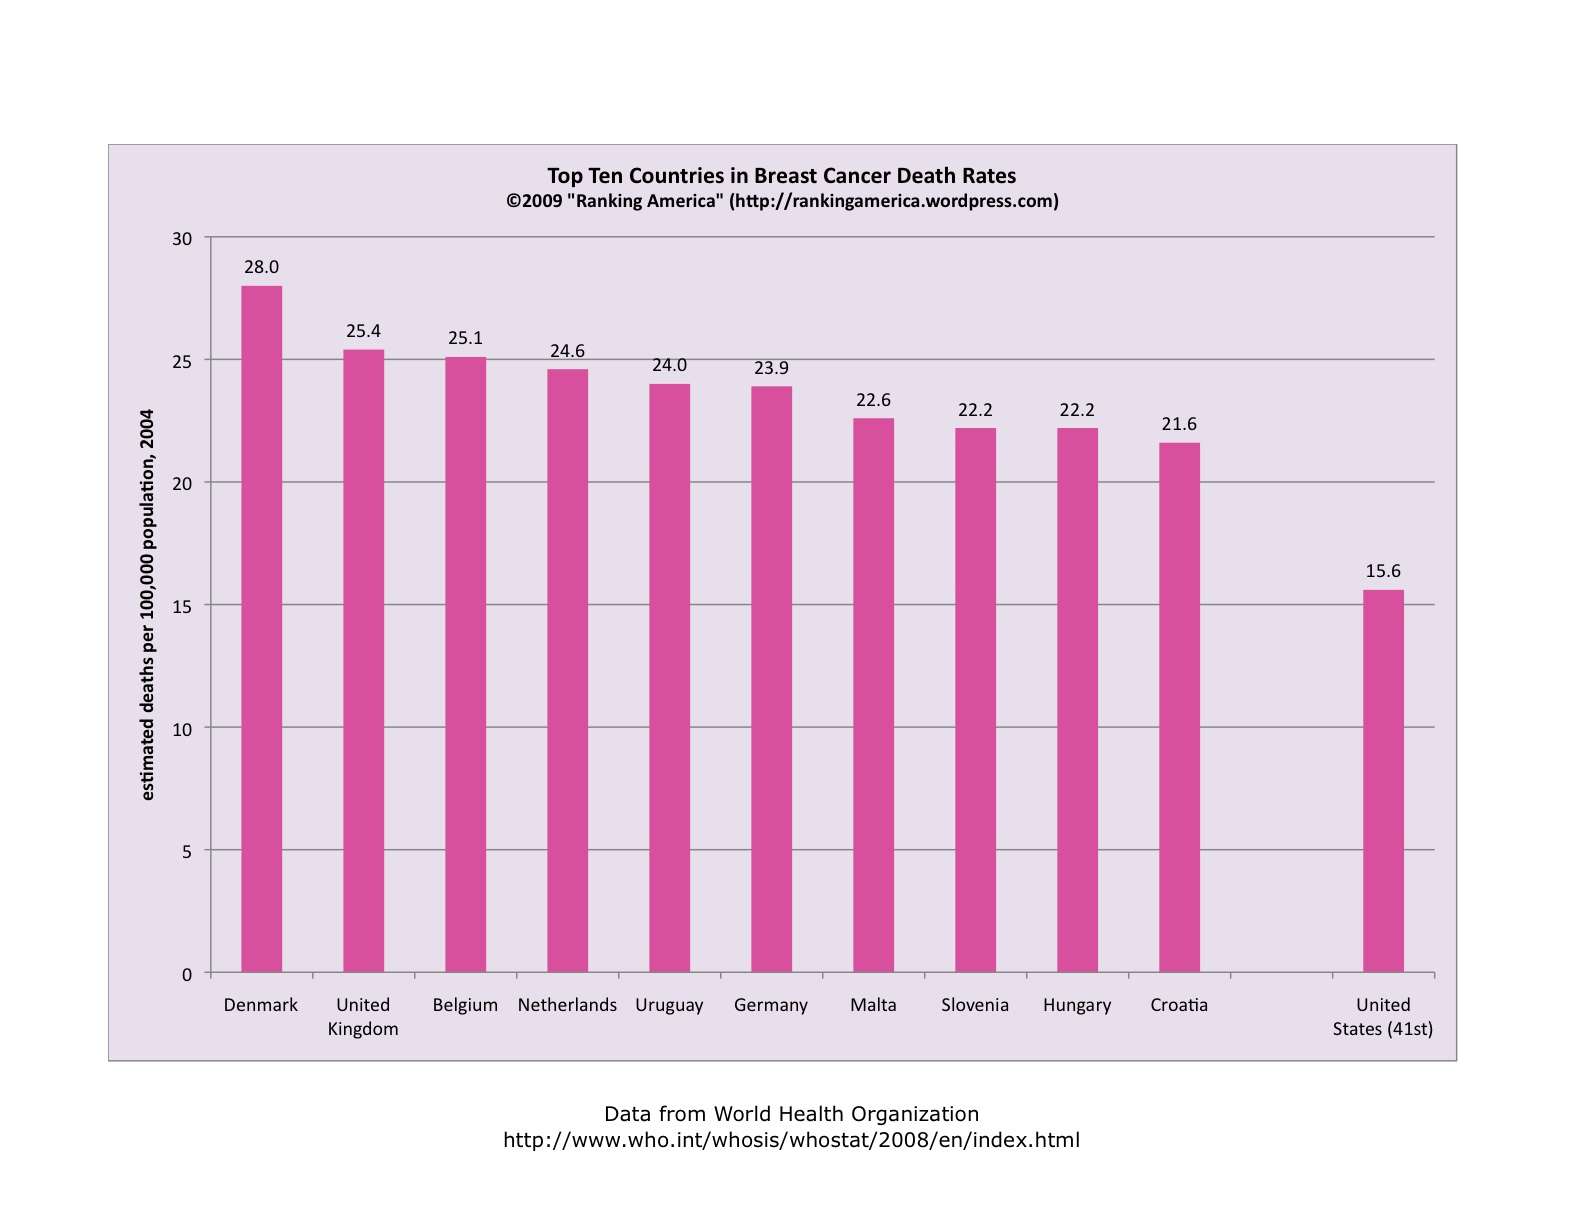 The U.S. ranks 41st in breast cancer death rates